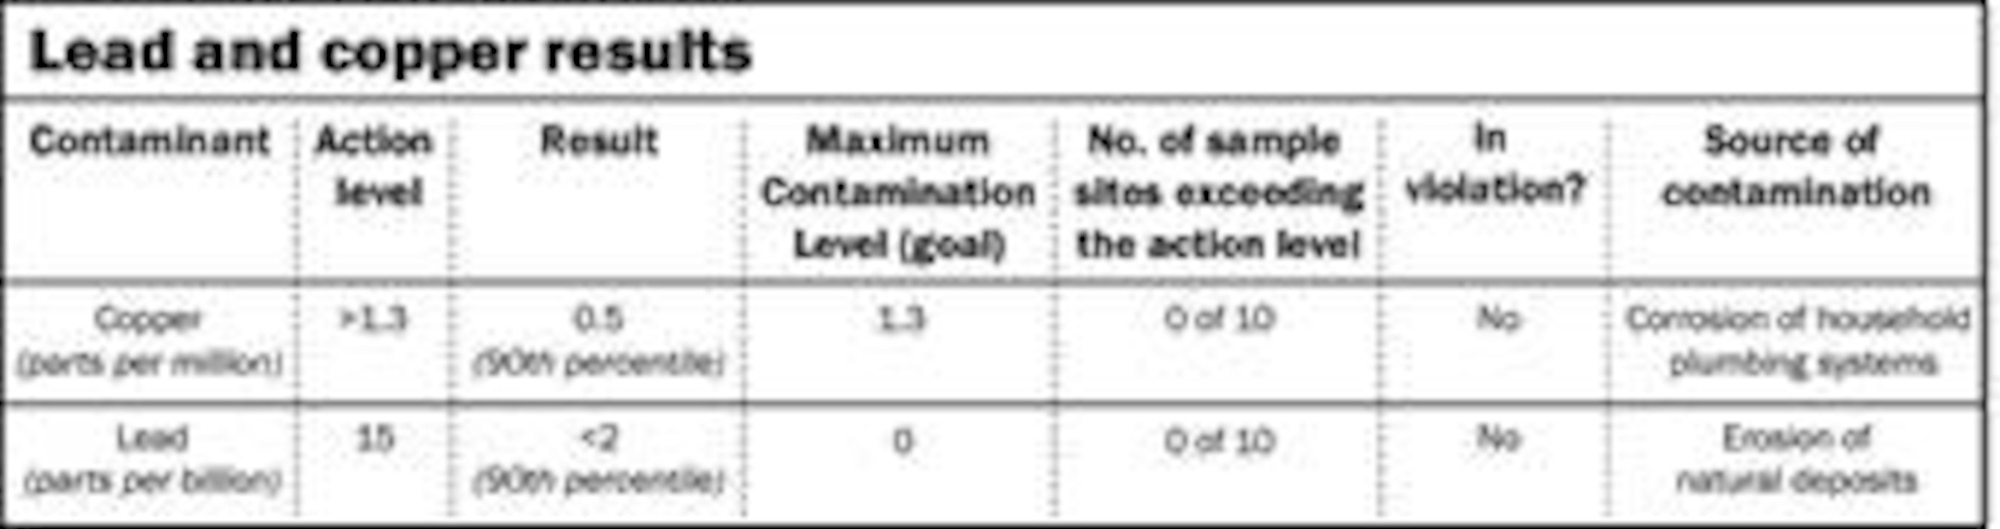 Following the table across, the action level is a concentration that triggers some type of control or treatment. The AL for lead and copper is based on the 90 percent rule - 90 percent of all samples taken must be below the AL.  Buckley?s 90th percentile result was .5 parts per million for copper and less than 2 parts per billion for lead.  Maximum contamination level is the limit below which there is no known or expected risk to health.  Buckley did not violate the lead and copper rule. 